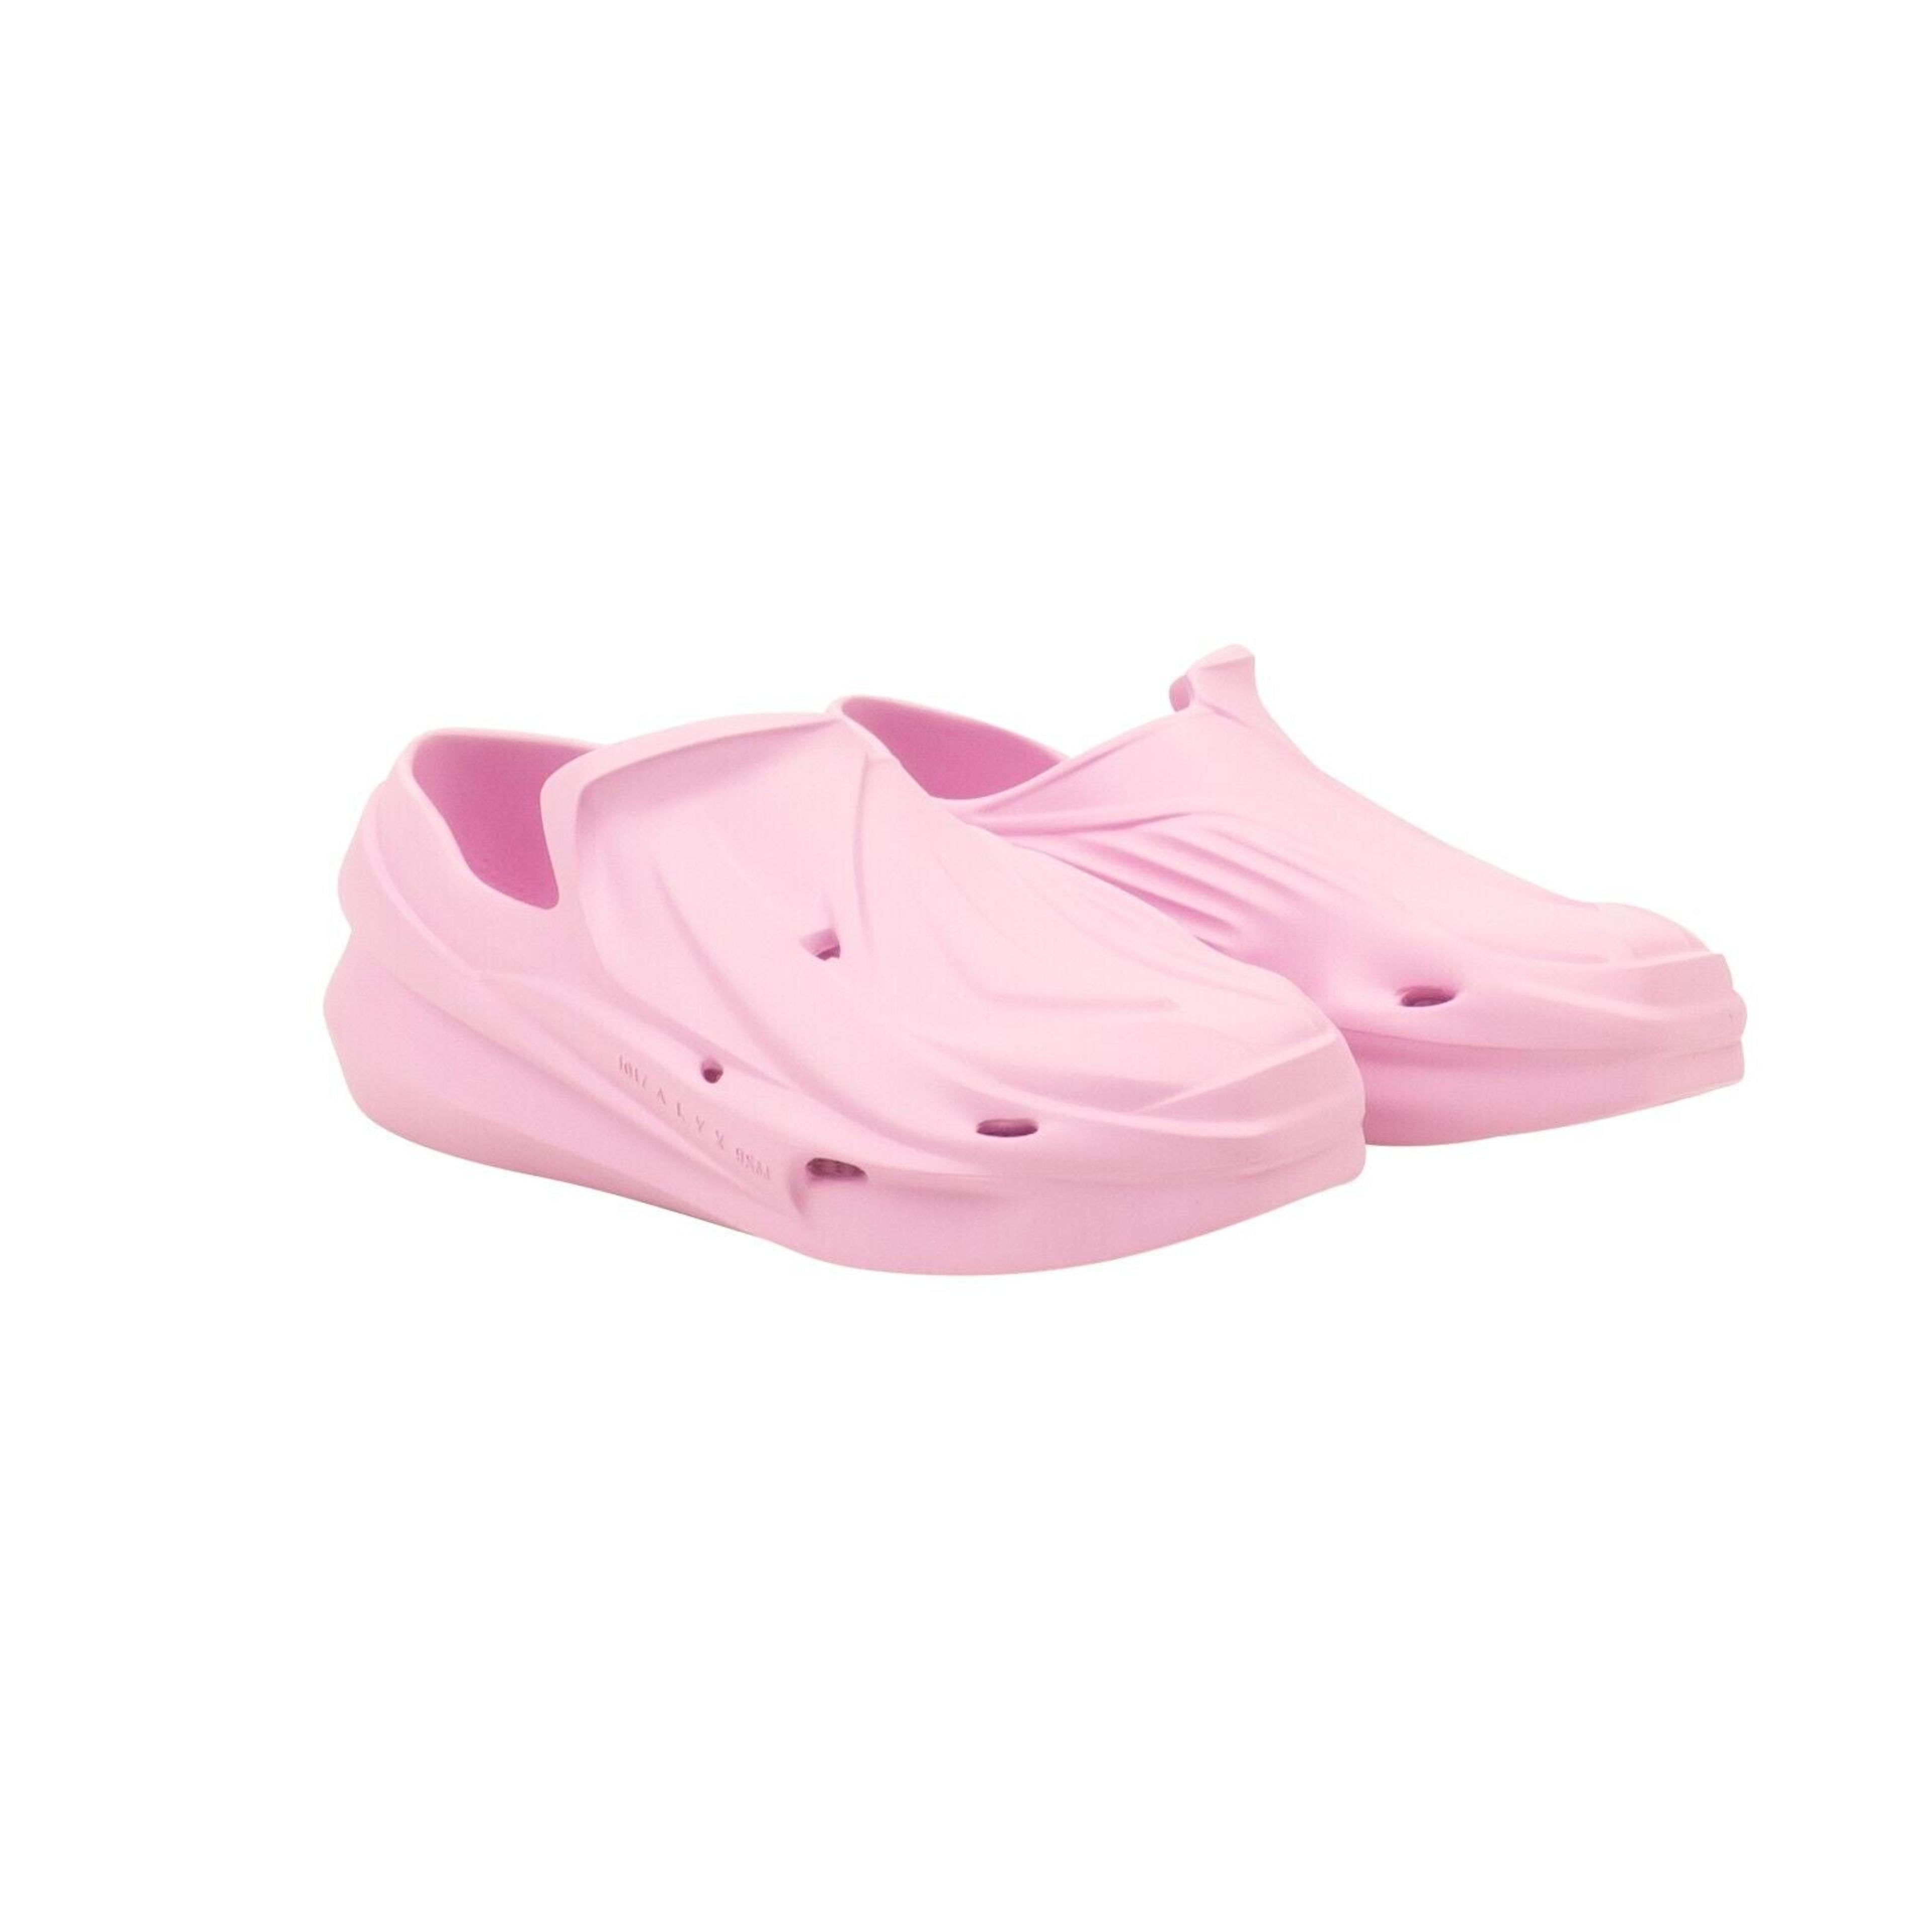 Alternate View 1 of Soft Pink Rubber Mono Slip On Shoes